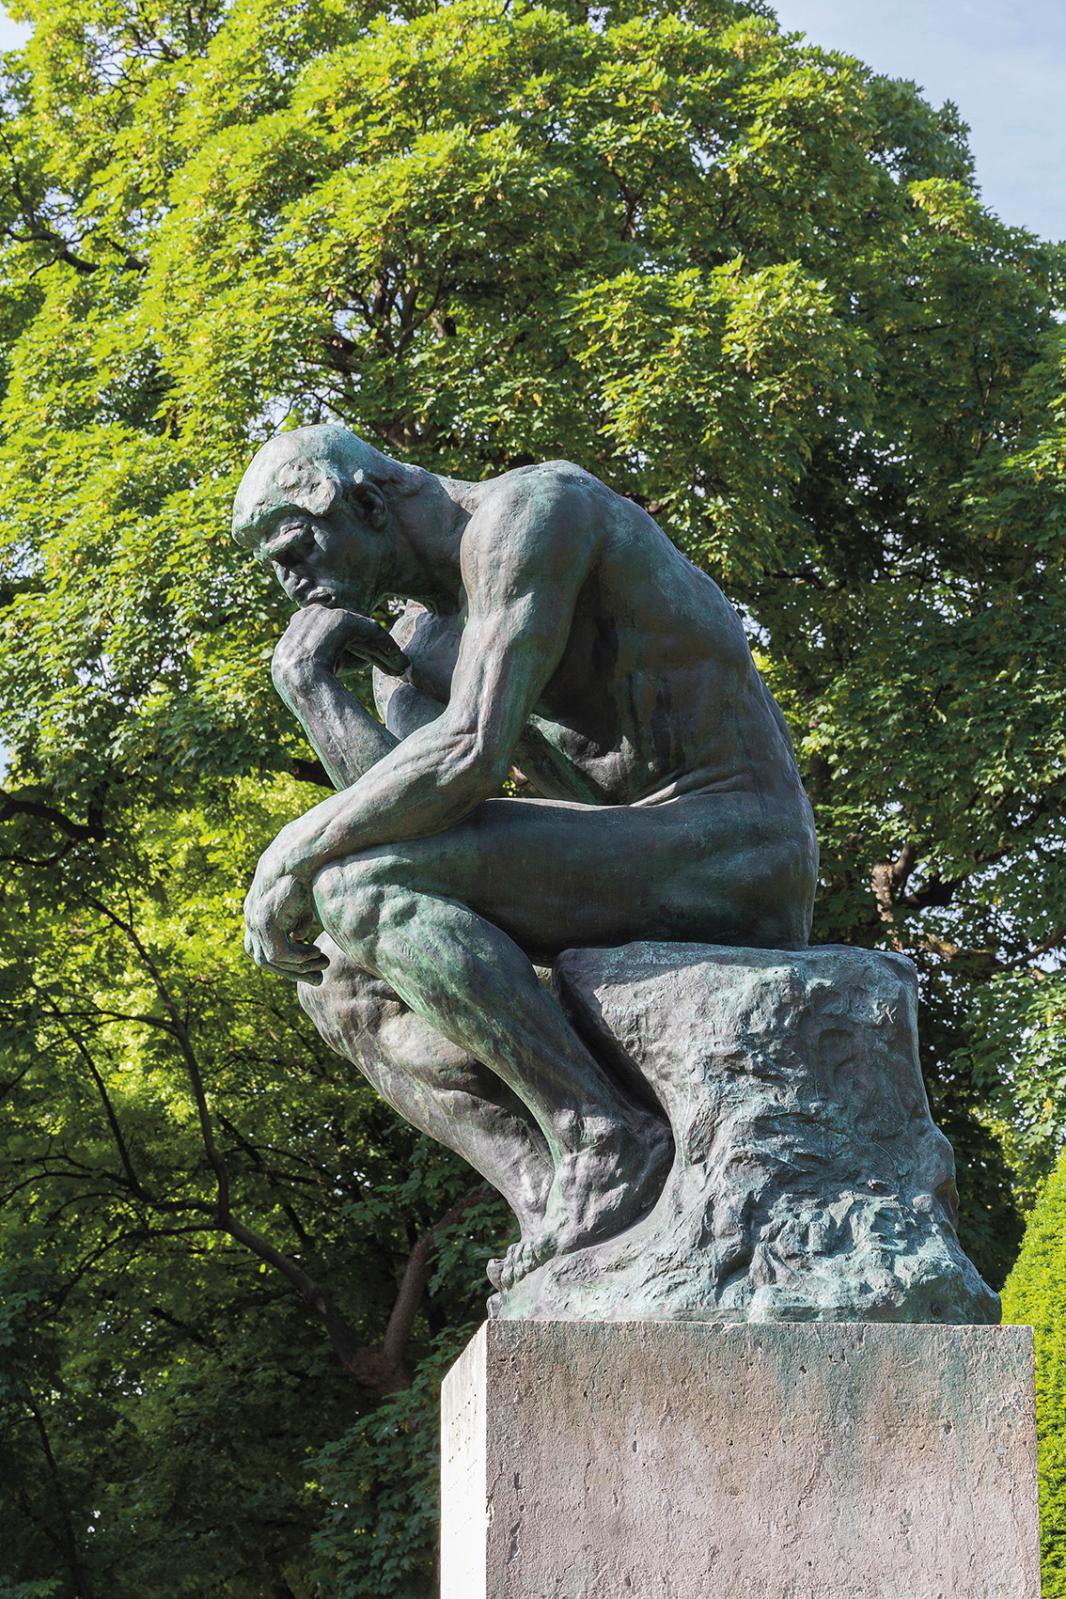 The Rodin Museum and Its Bronzes